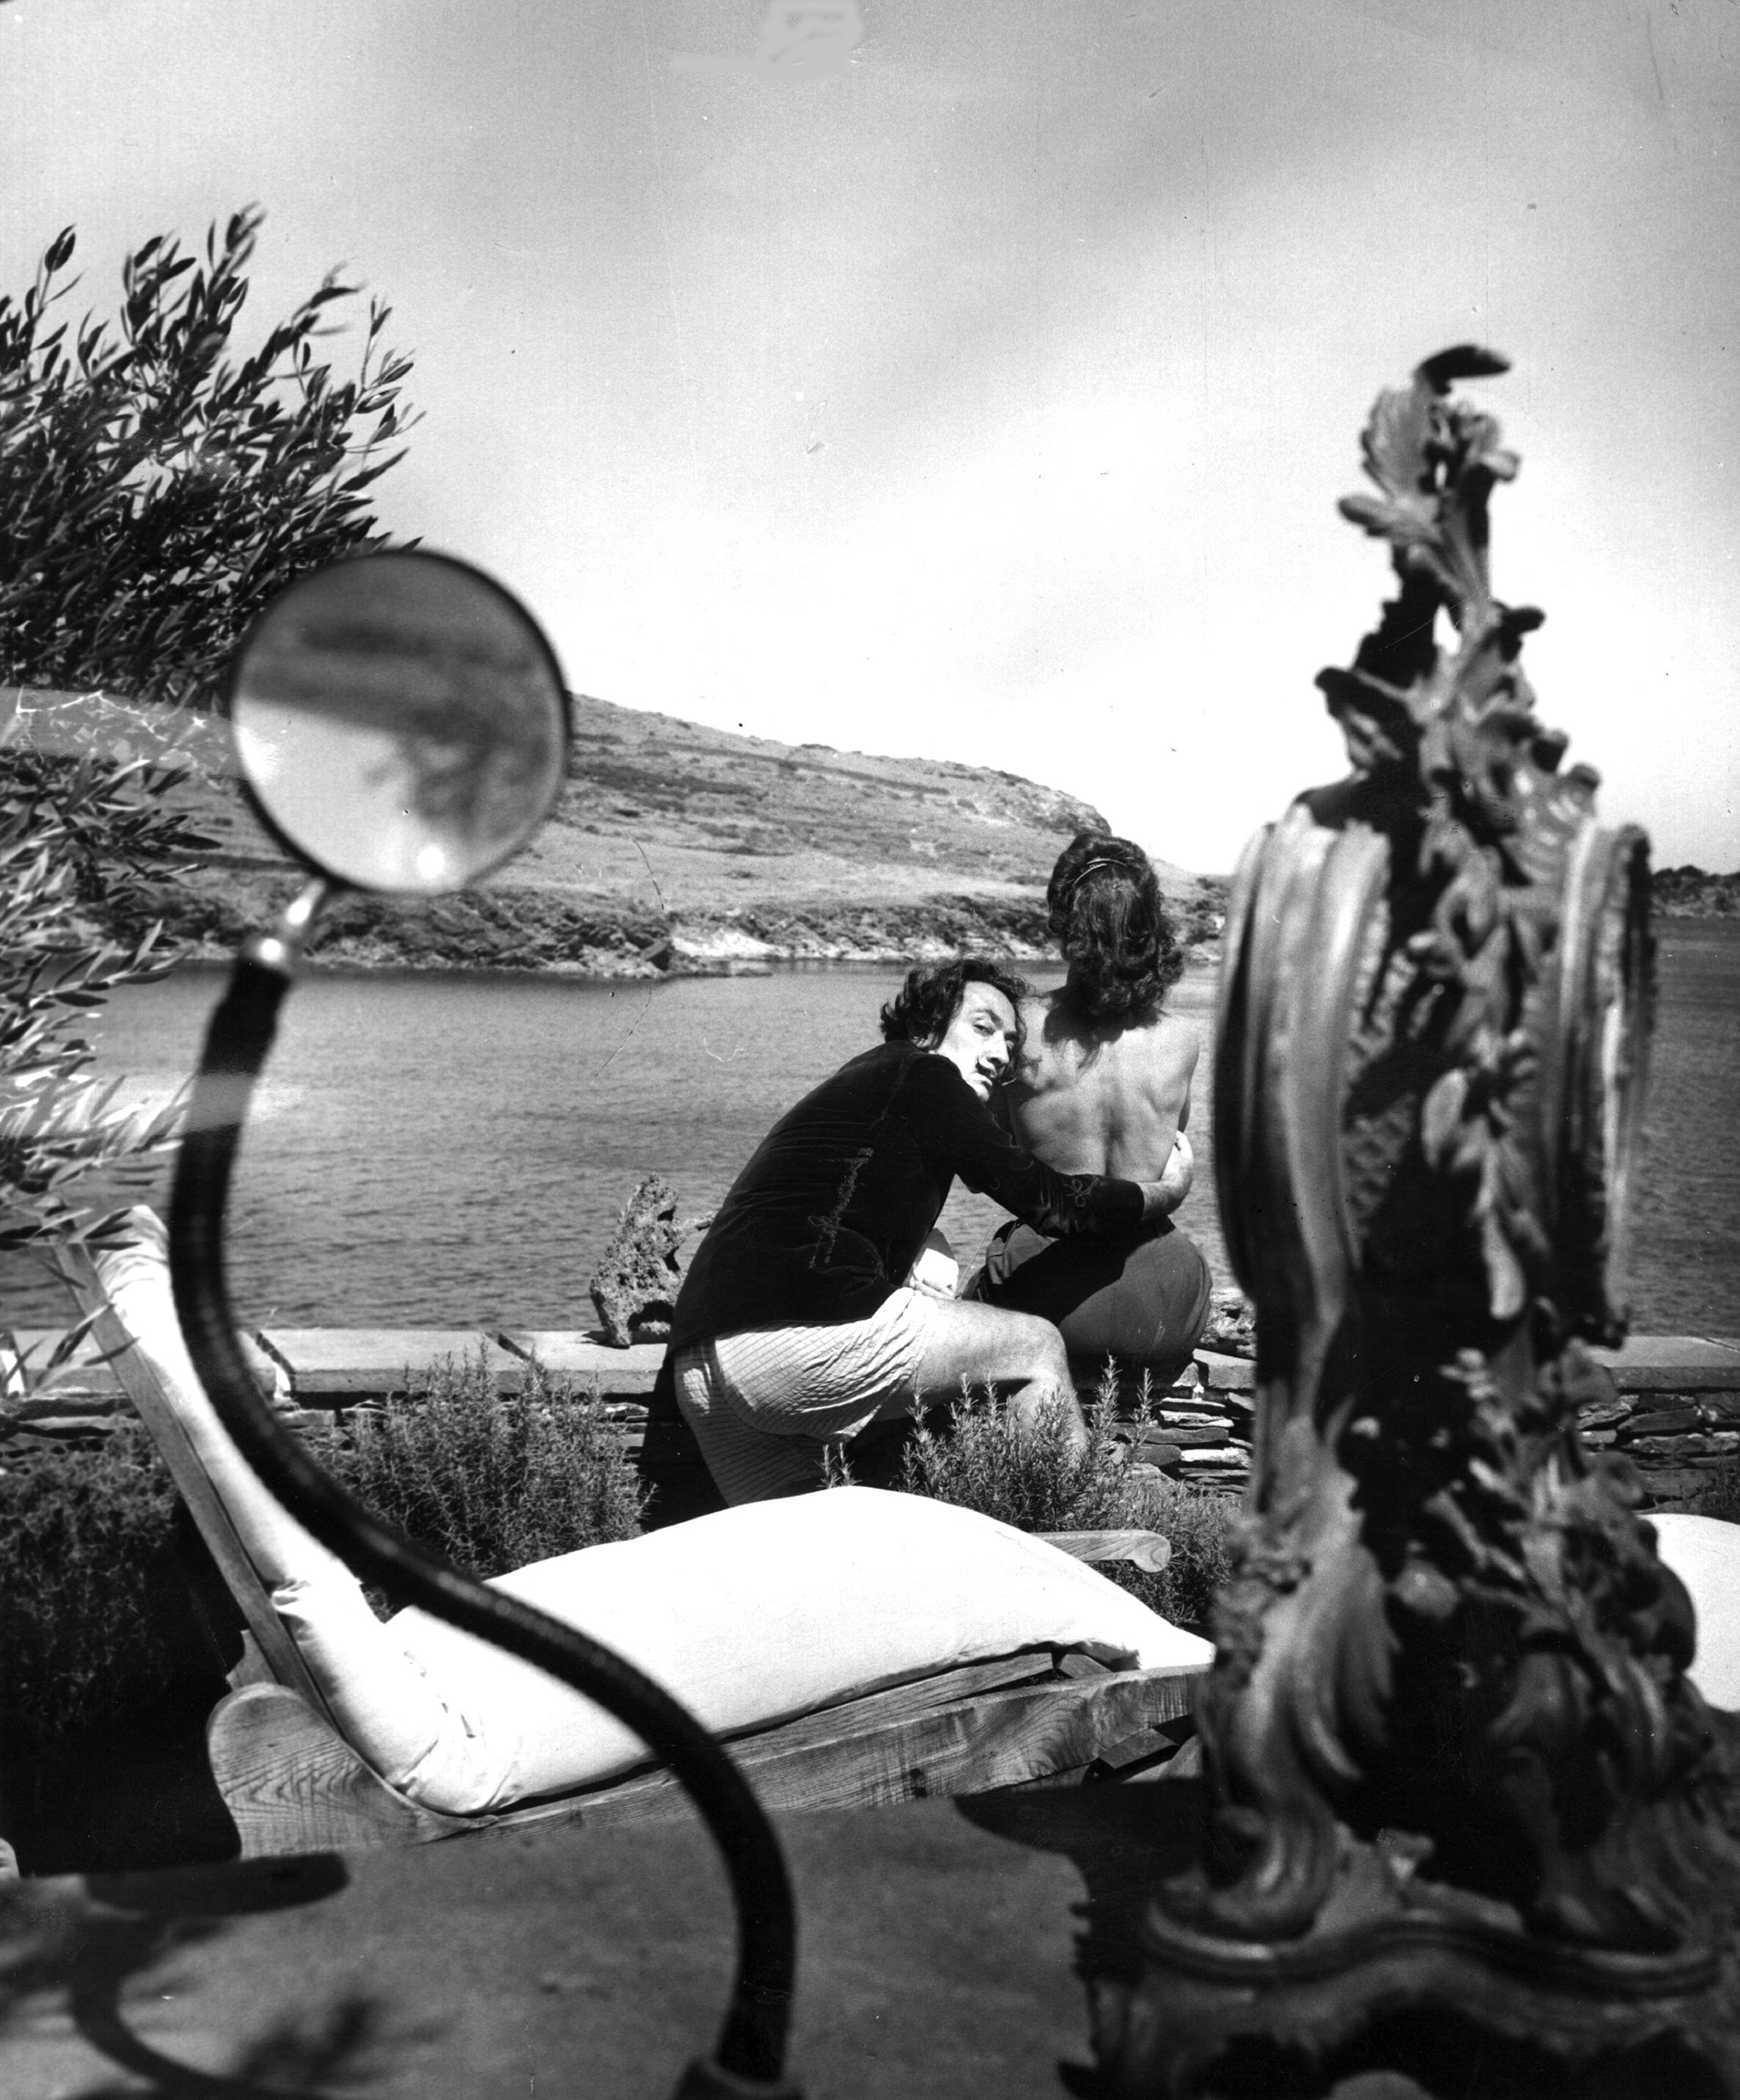 Salvador Dali with his wife Gala at the garden of his home in Cadaques on the Spanish Costa Brava. 1955.